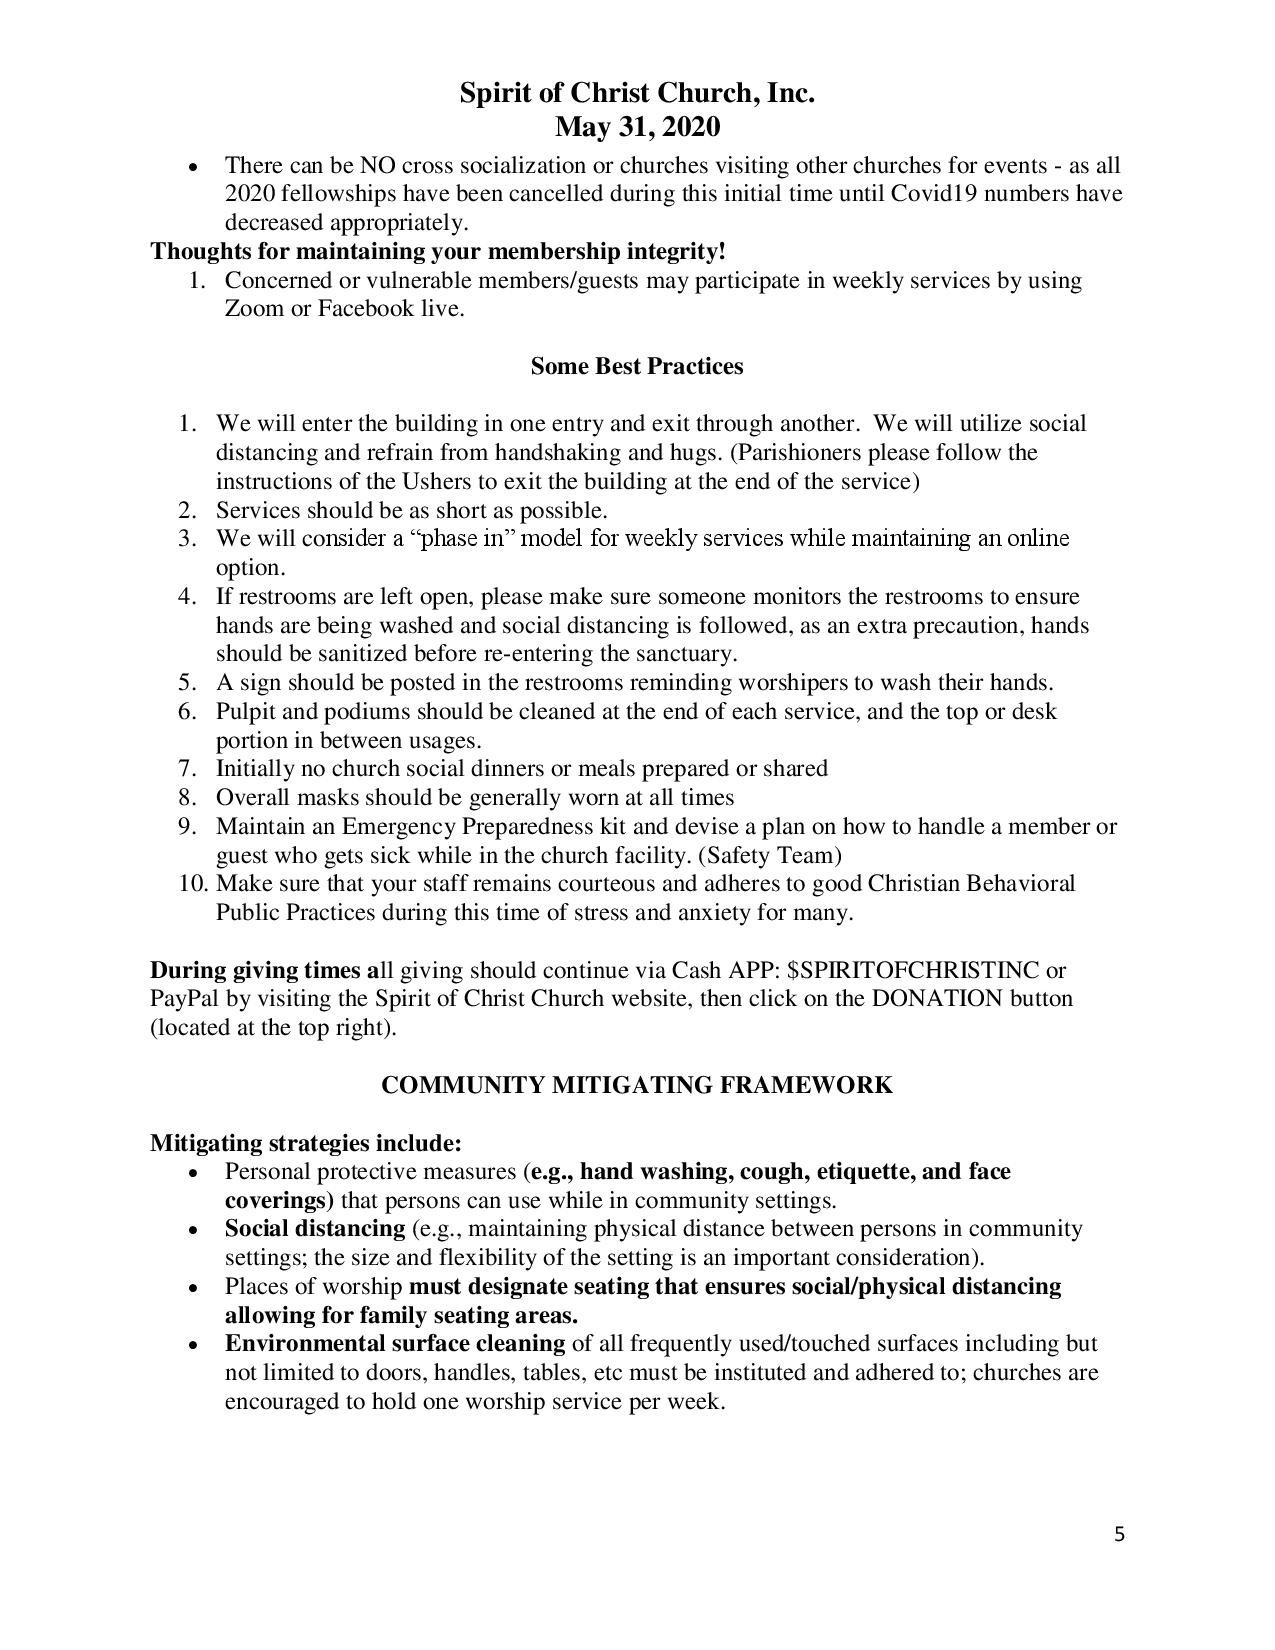 COVID-19_SAFELY REOPENING HOUSES OF WORSHIP GUIDELINE AND SUMMARY-page-005